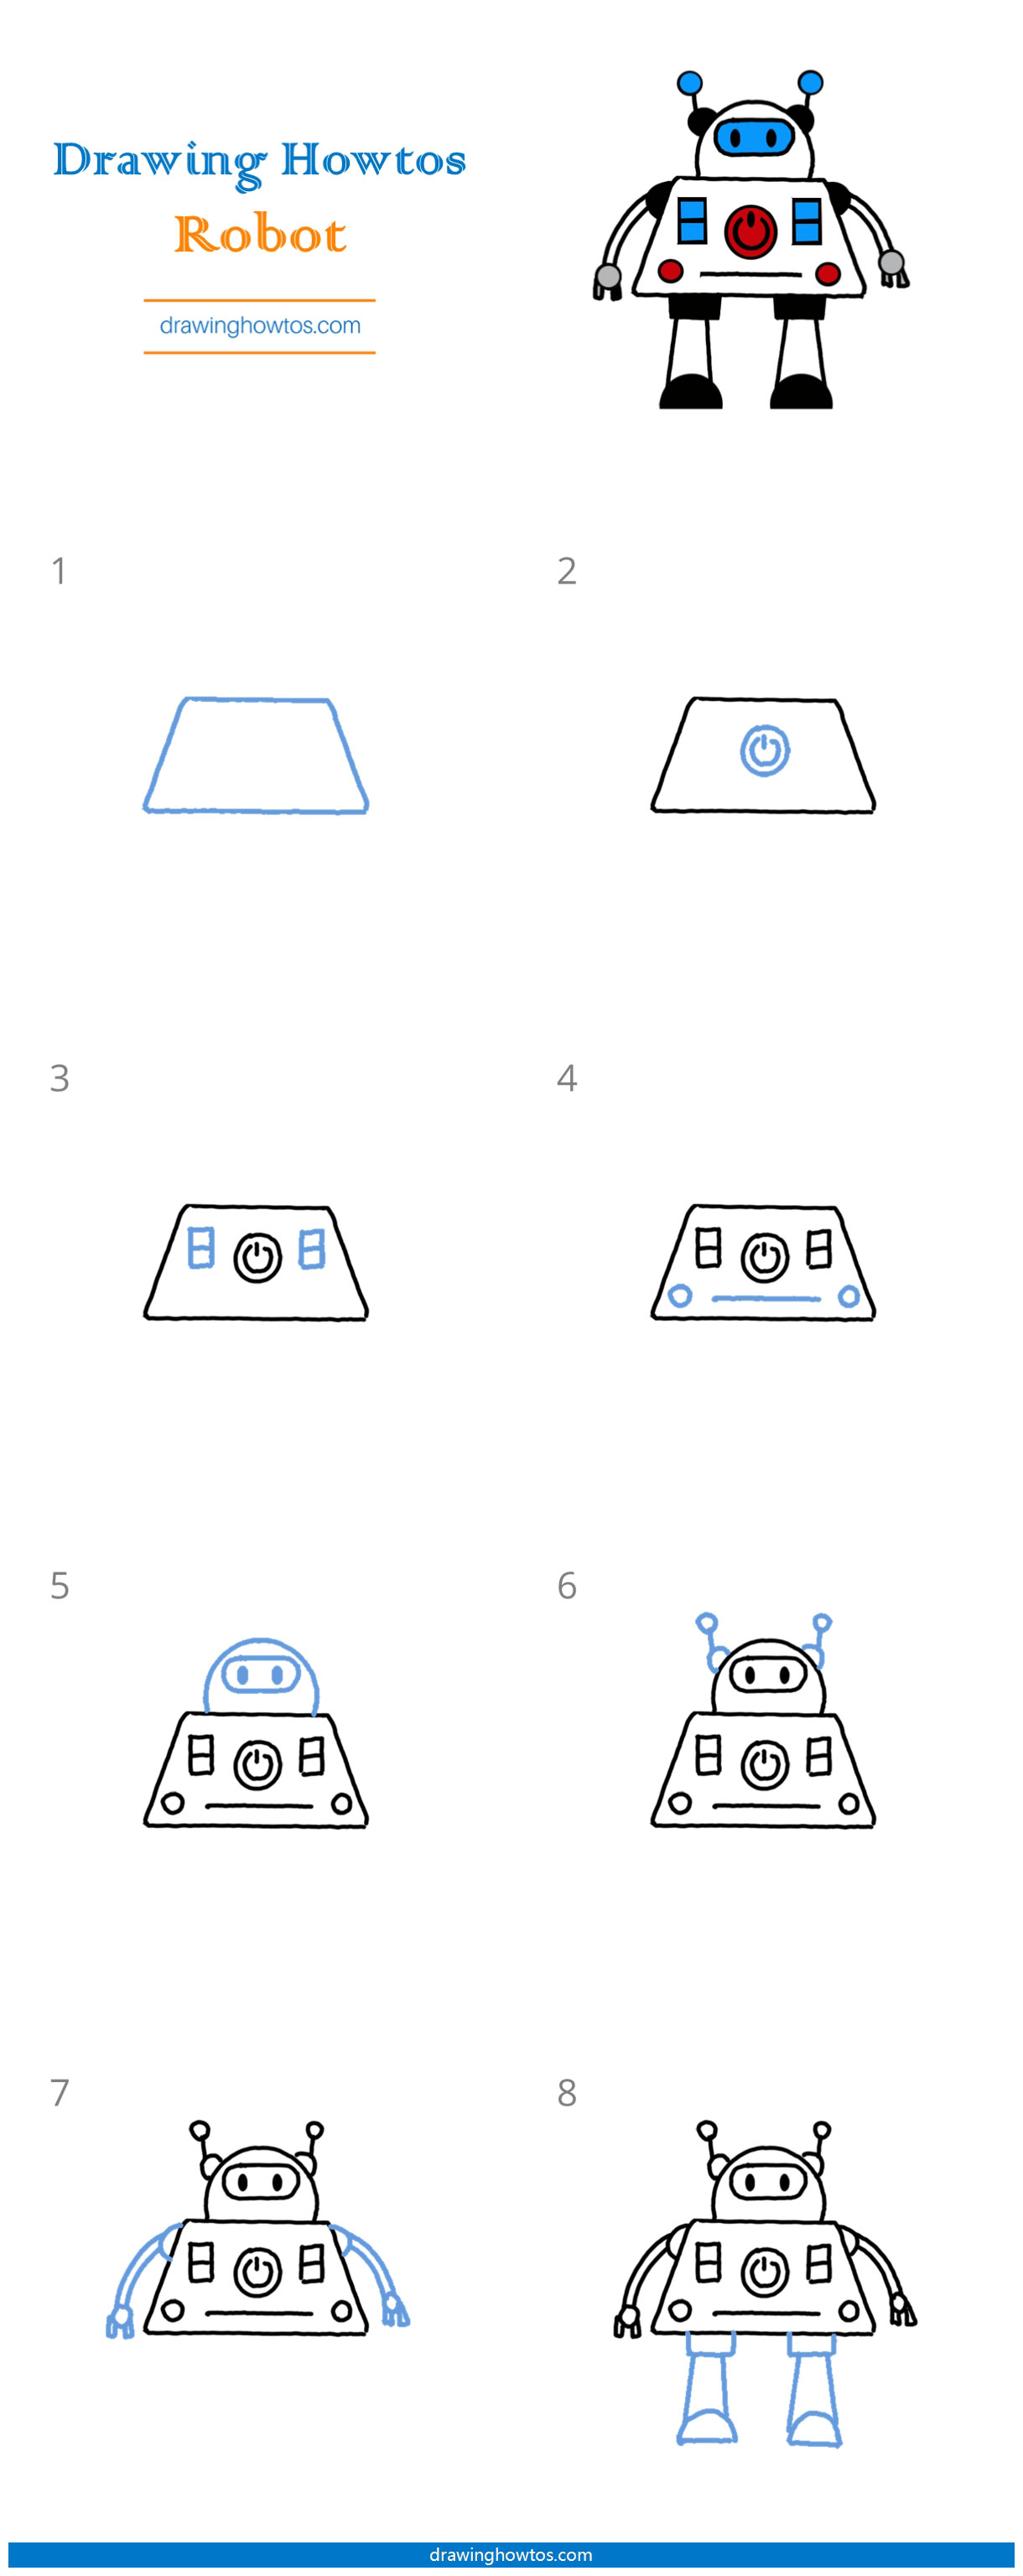 Comment dessiner un robot  How to draw a robot step by step 